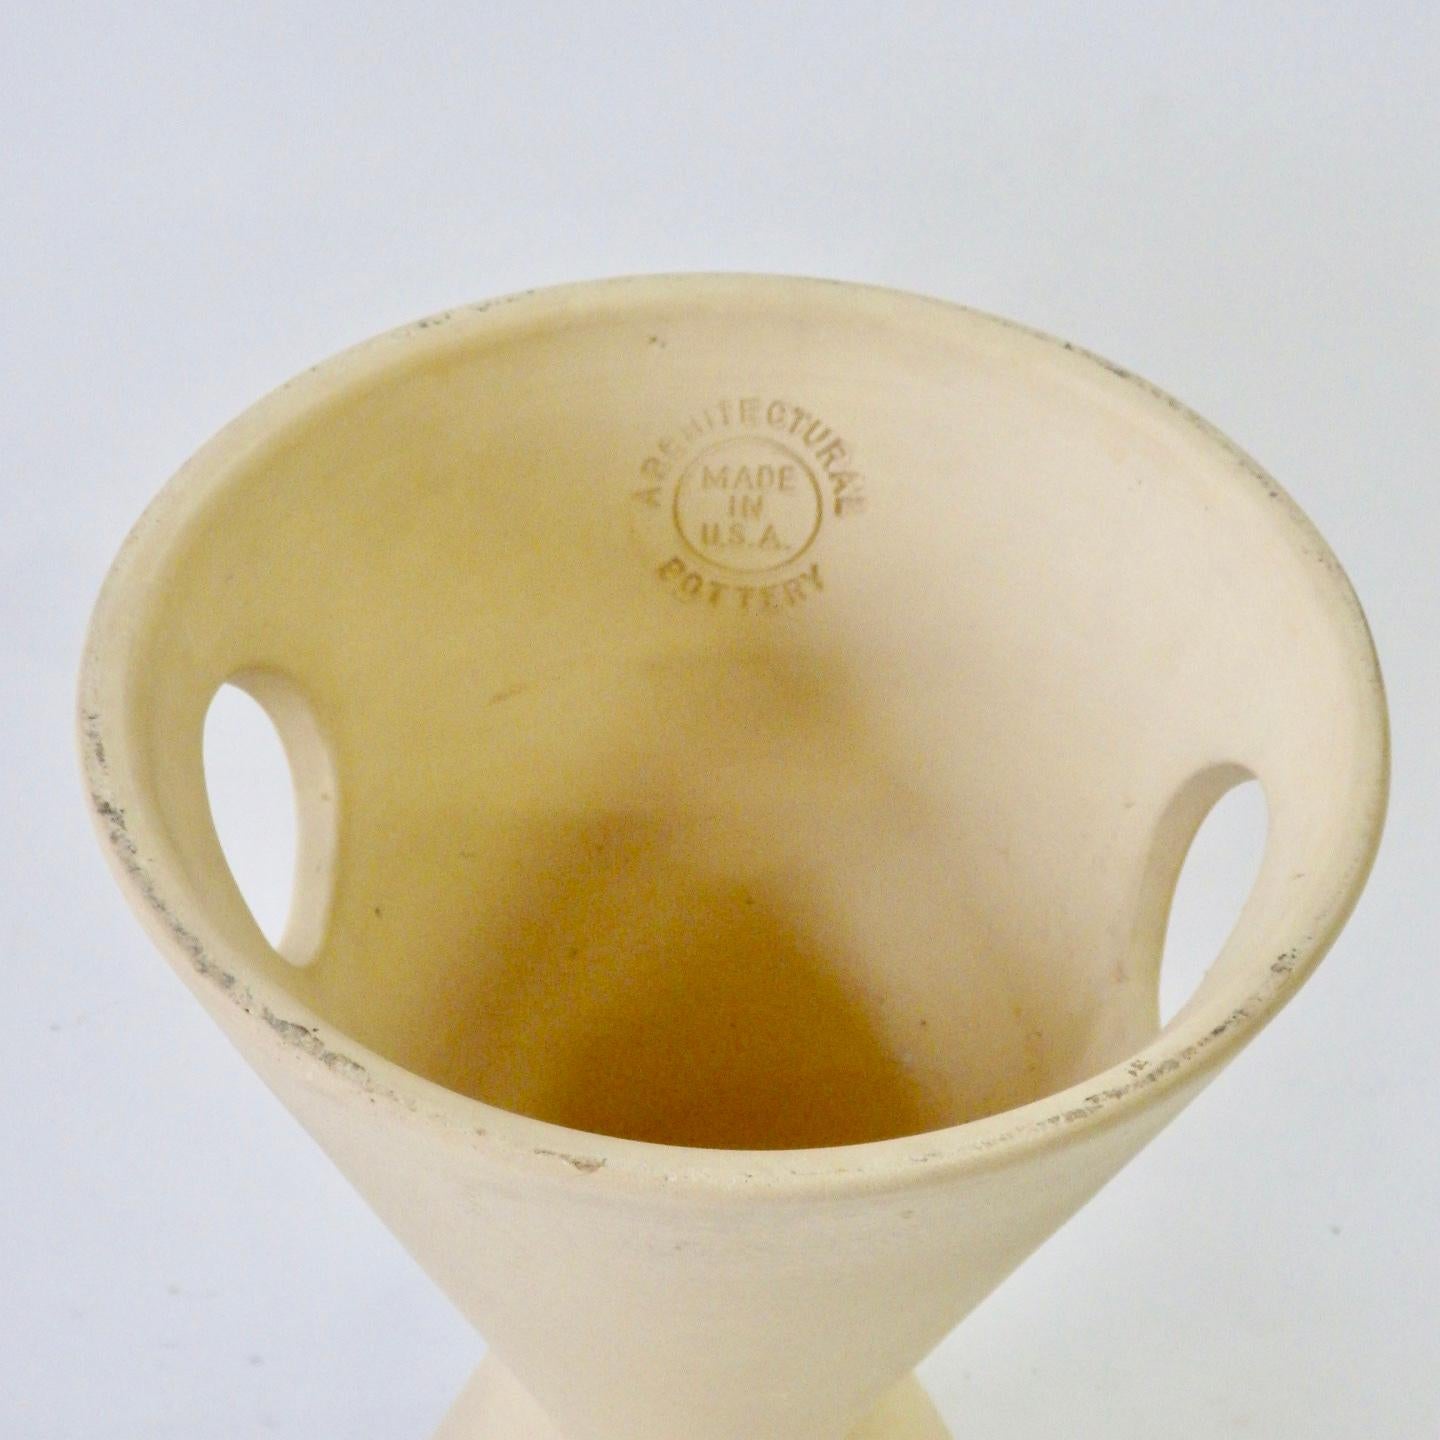 Nice clear architectural pottery stamp on this early Lagardo Tackett double cone planter pot. Unglazed bisque finish.